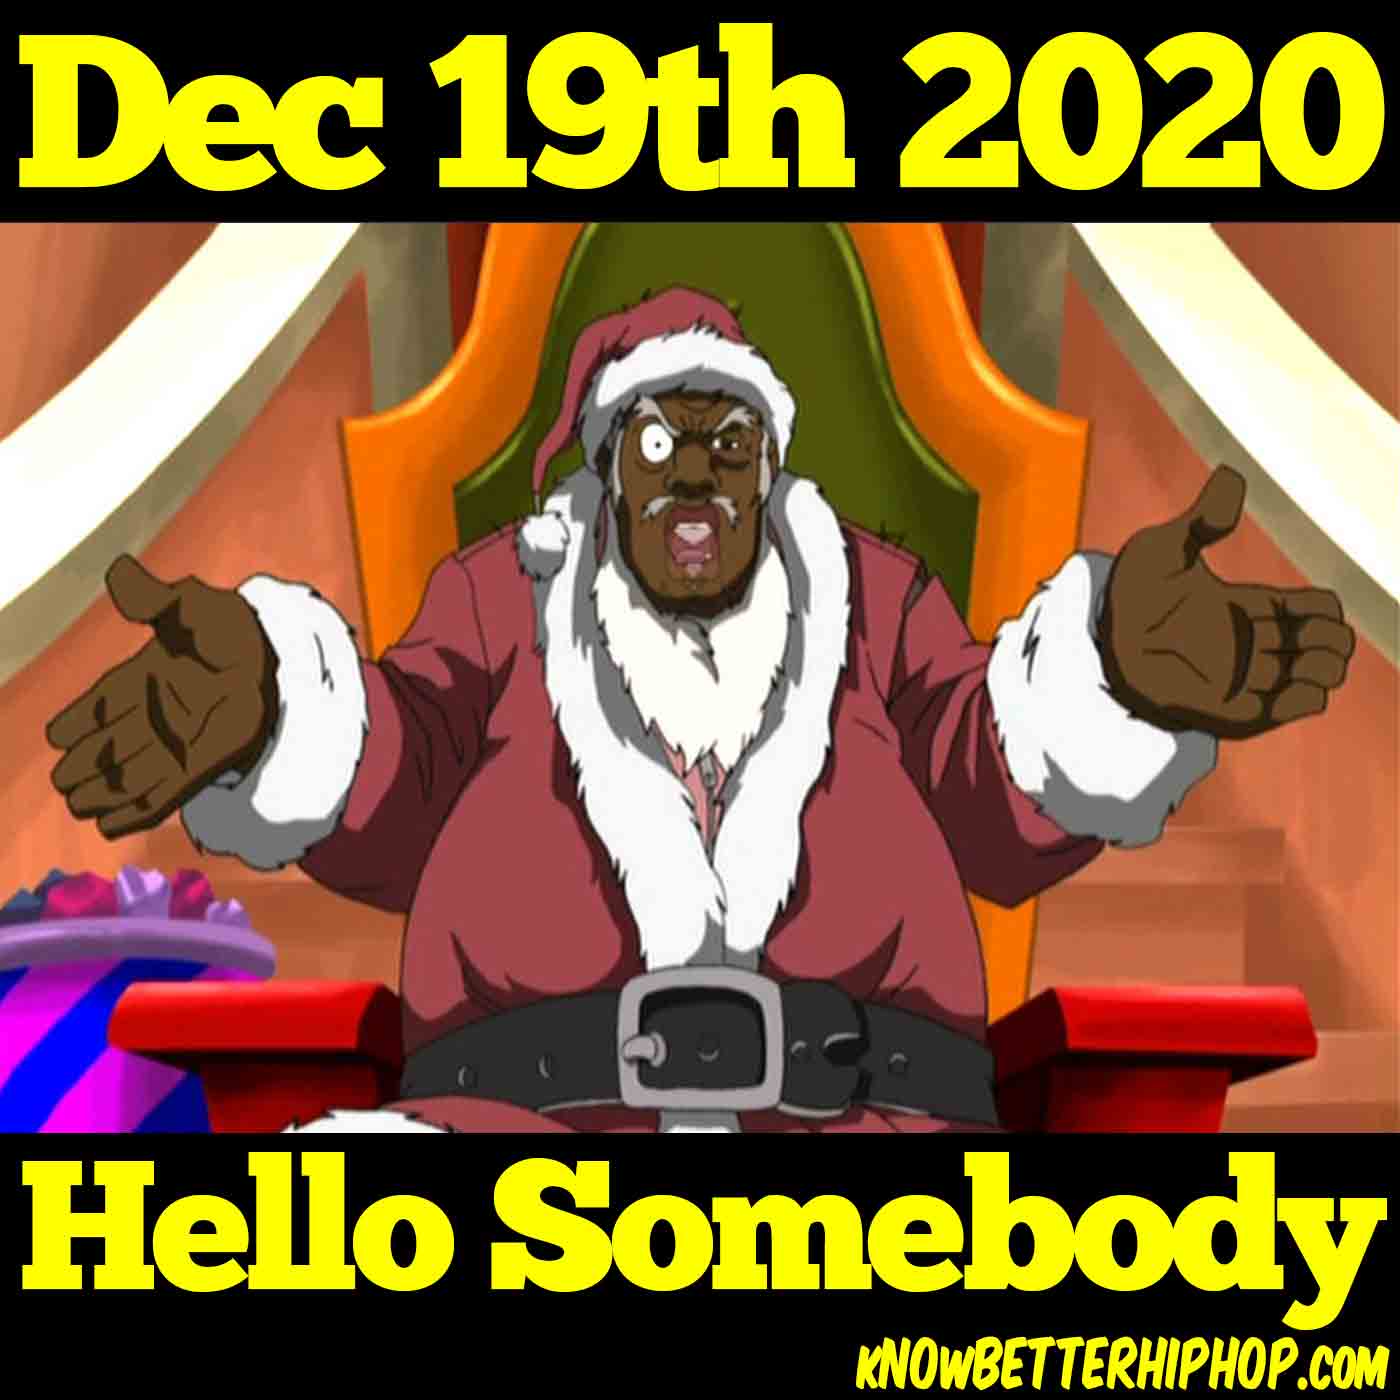 12-19-20 OUR show Hello Somebody